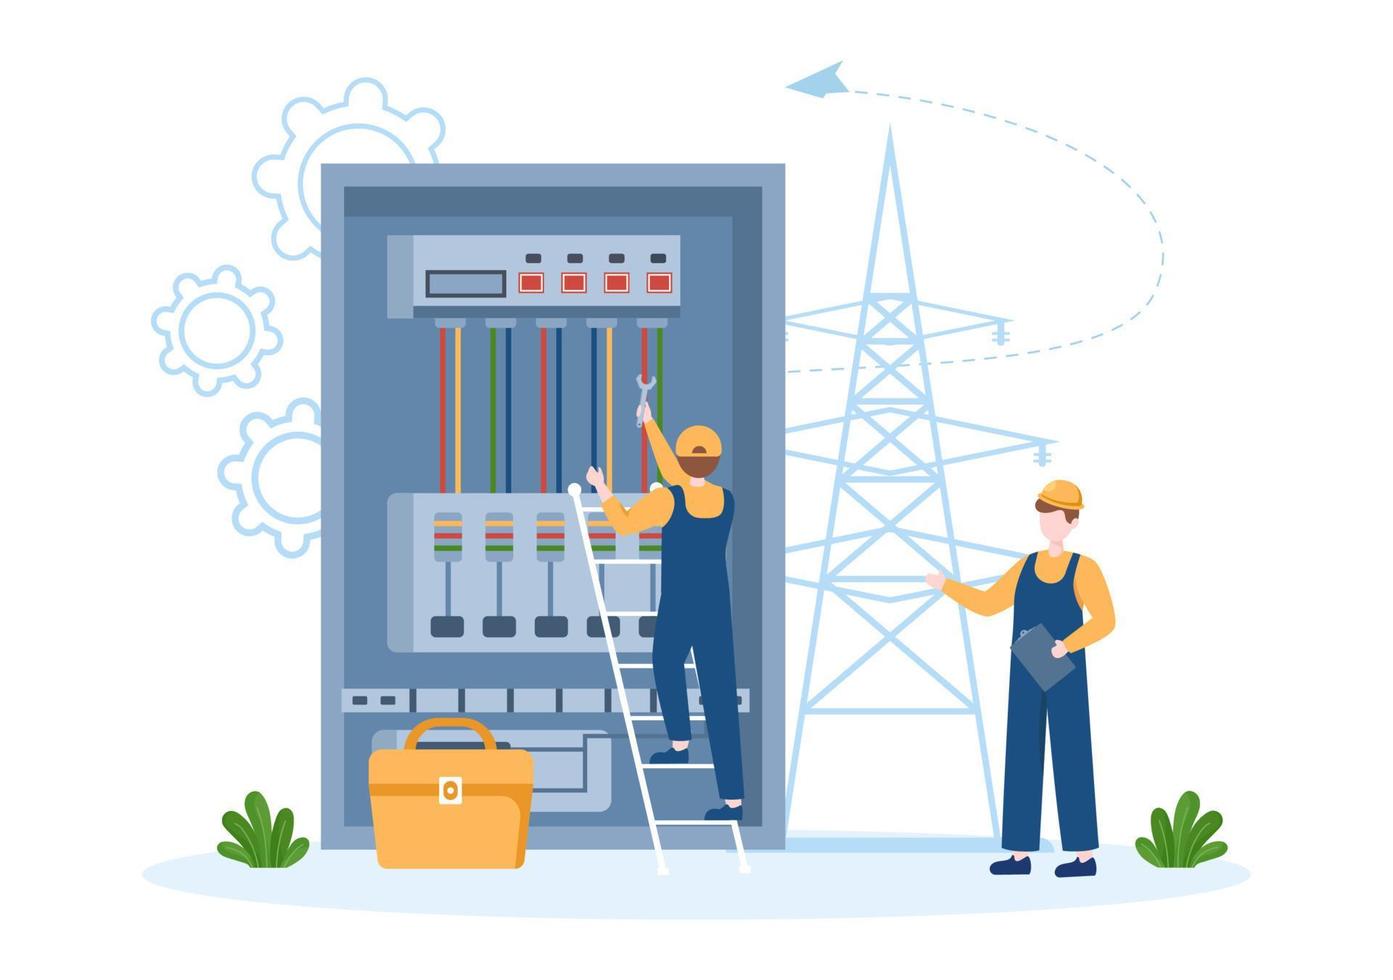 Lighting and Electricity Energy Maintenance Service Panel Cabinet of Technician Electrical Work on Flat Cartoon Hand Drawn Templates Illustration vector